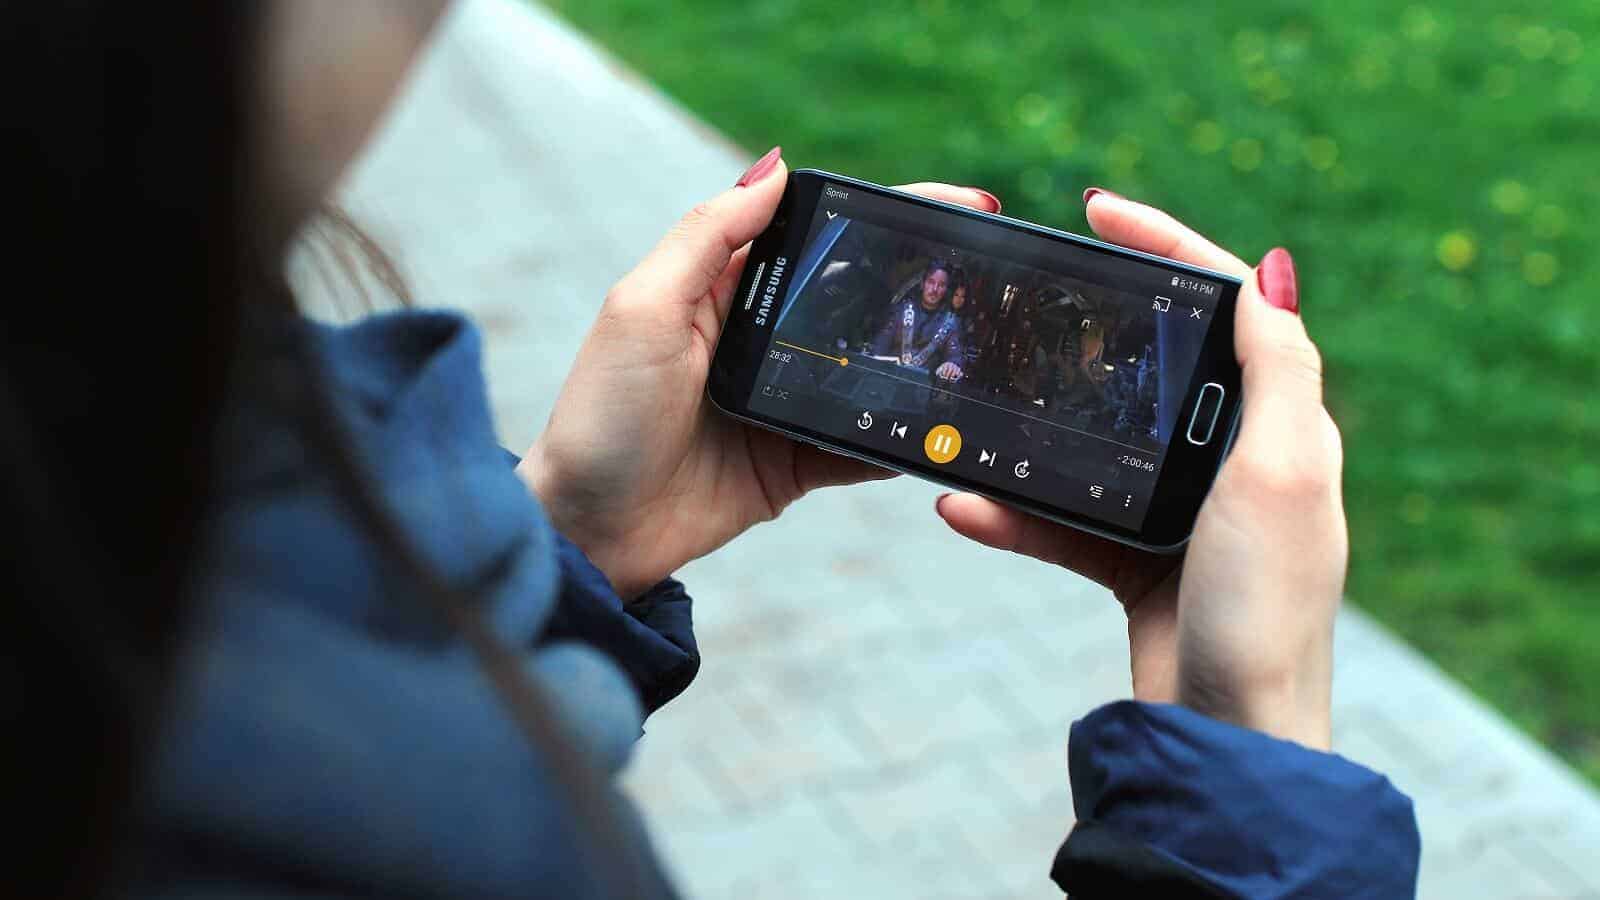 Plex will be the world's largest free streaming service for live channels